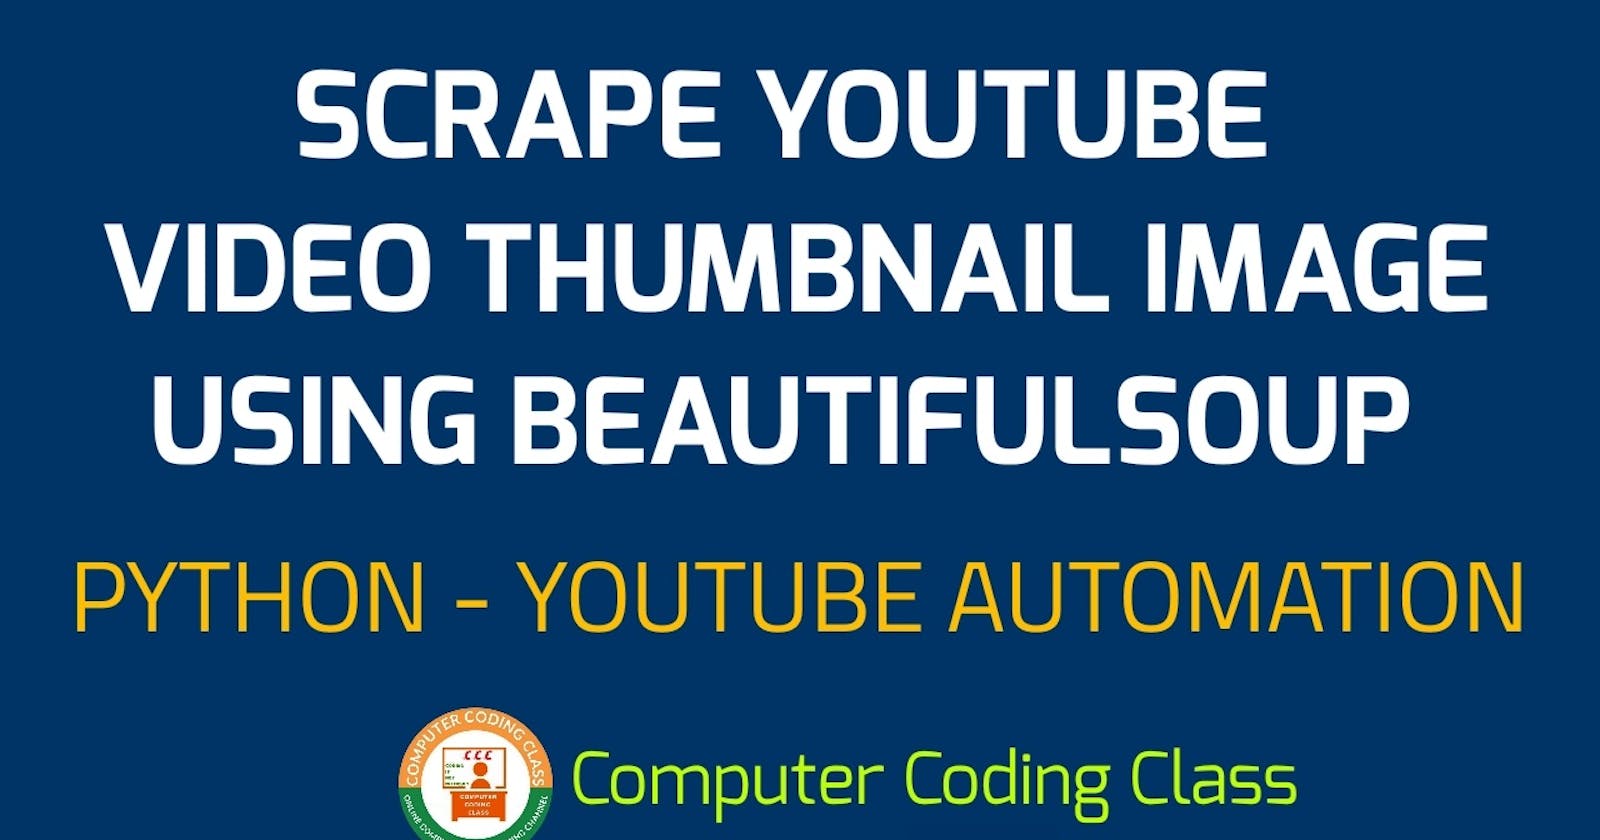 How to Scrape the Thumbnail of a YouTube Video using BeautifulSoup | YouTube Automation Python.